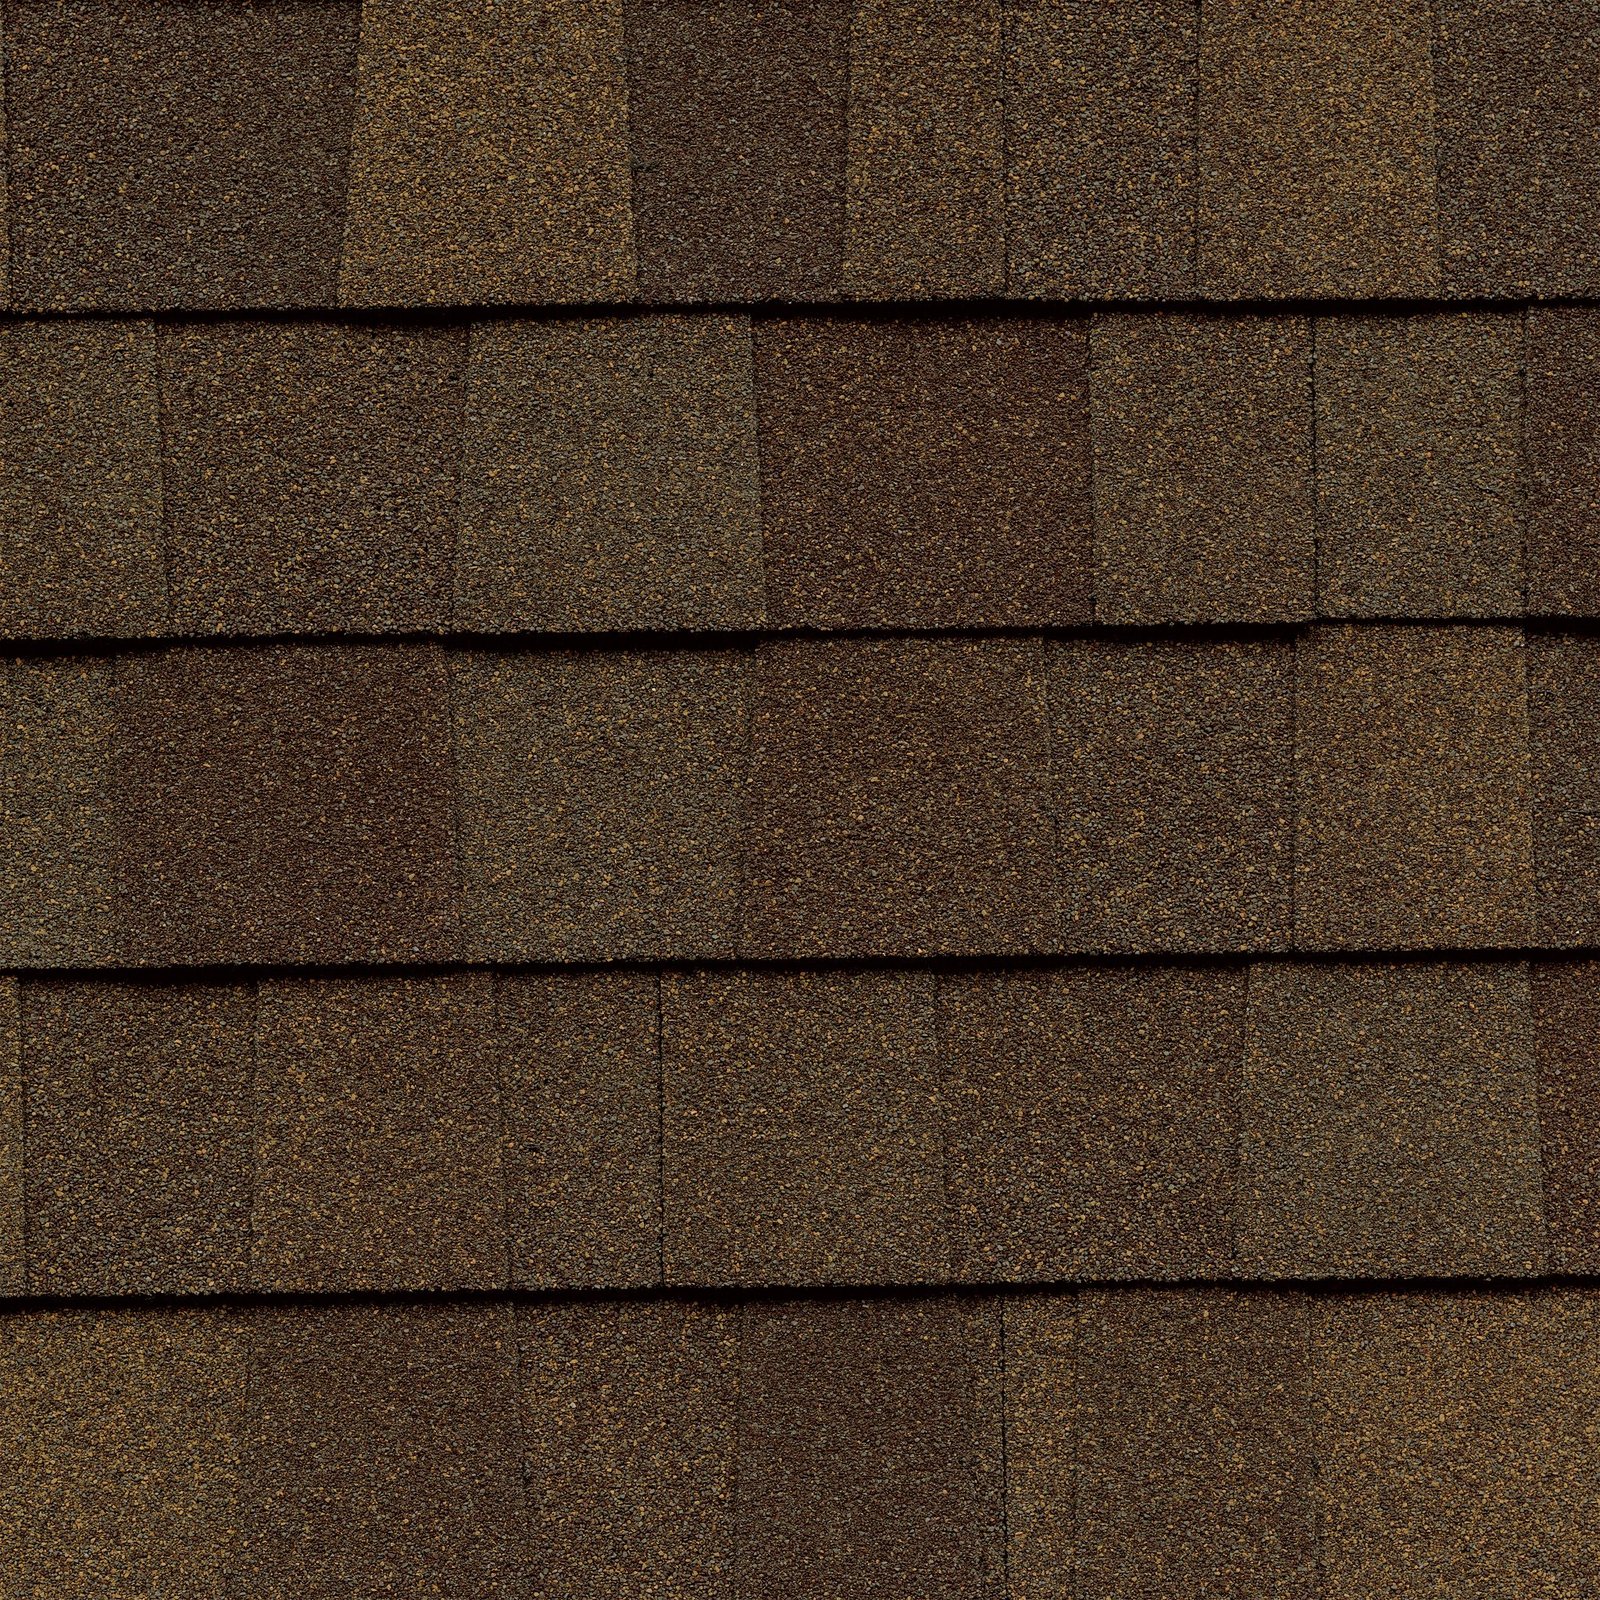 Close up photo of GAF's Timberline American Harvest Adobe Sunset shingle swatch